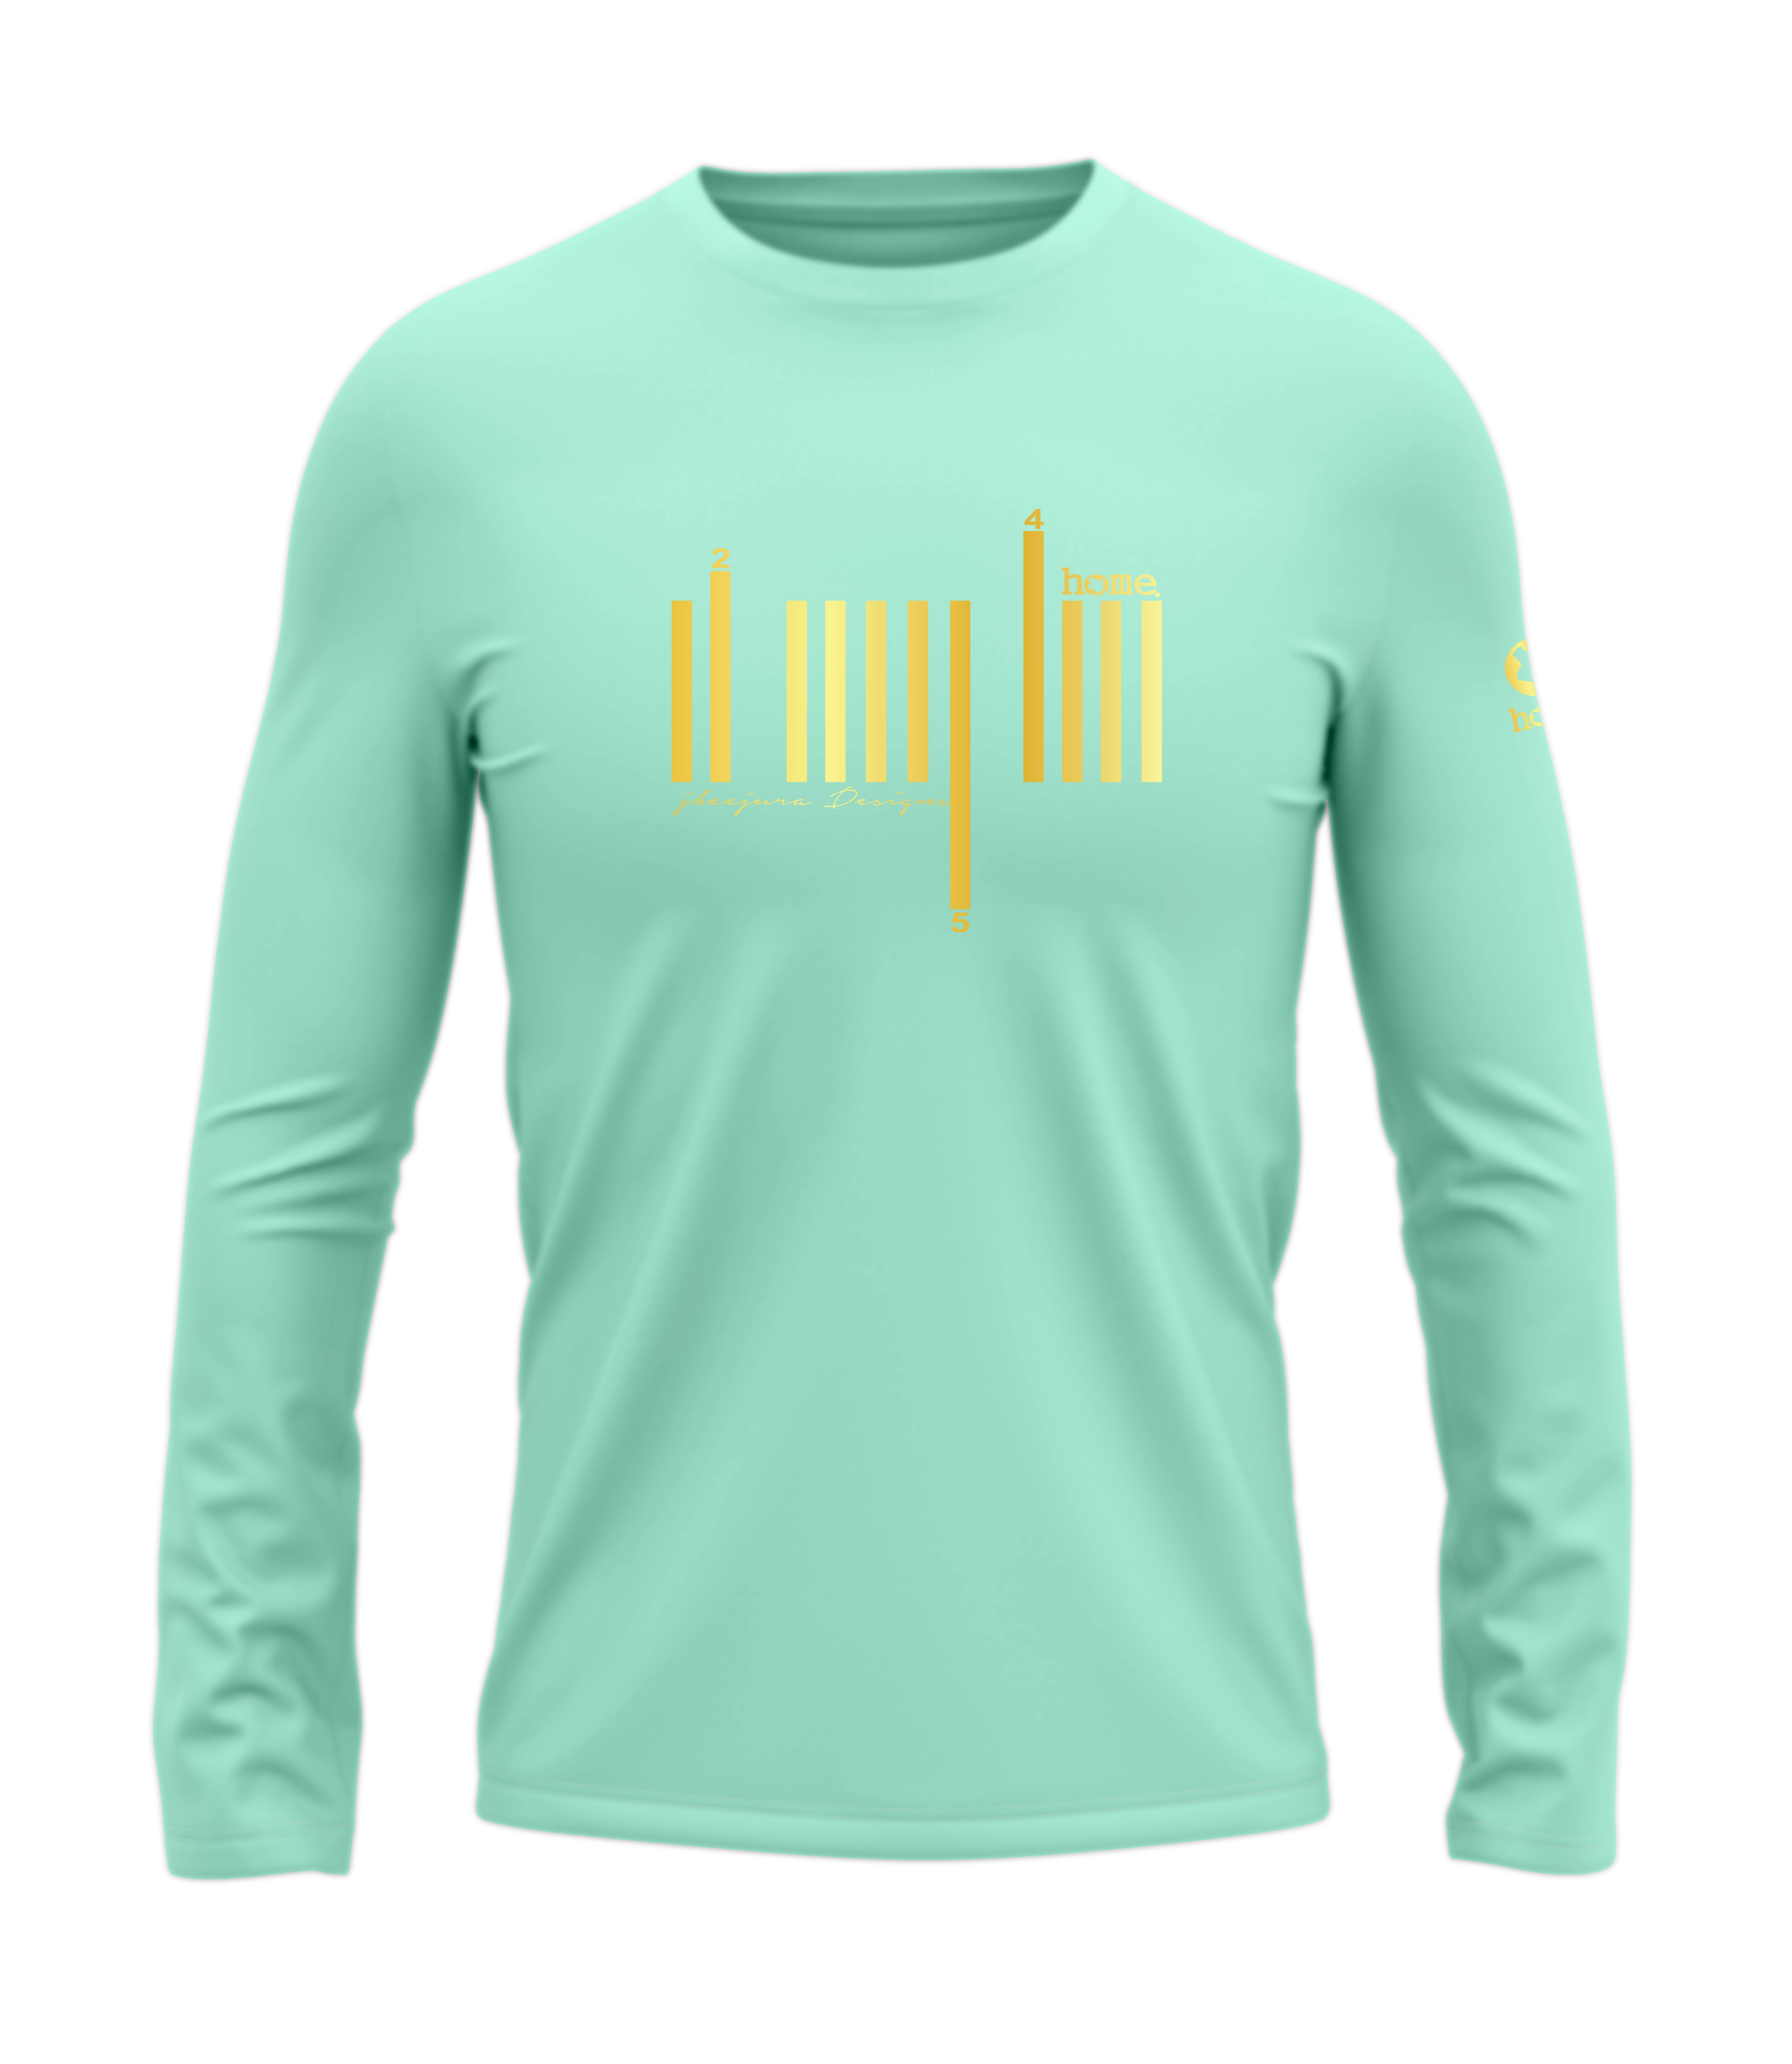 home_254 LONG-SLEEVED TURQUOISE GREEN T-SHIRT WITH A GOLD BARS PRINT – COTTON PLUS FABRIC